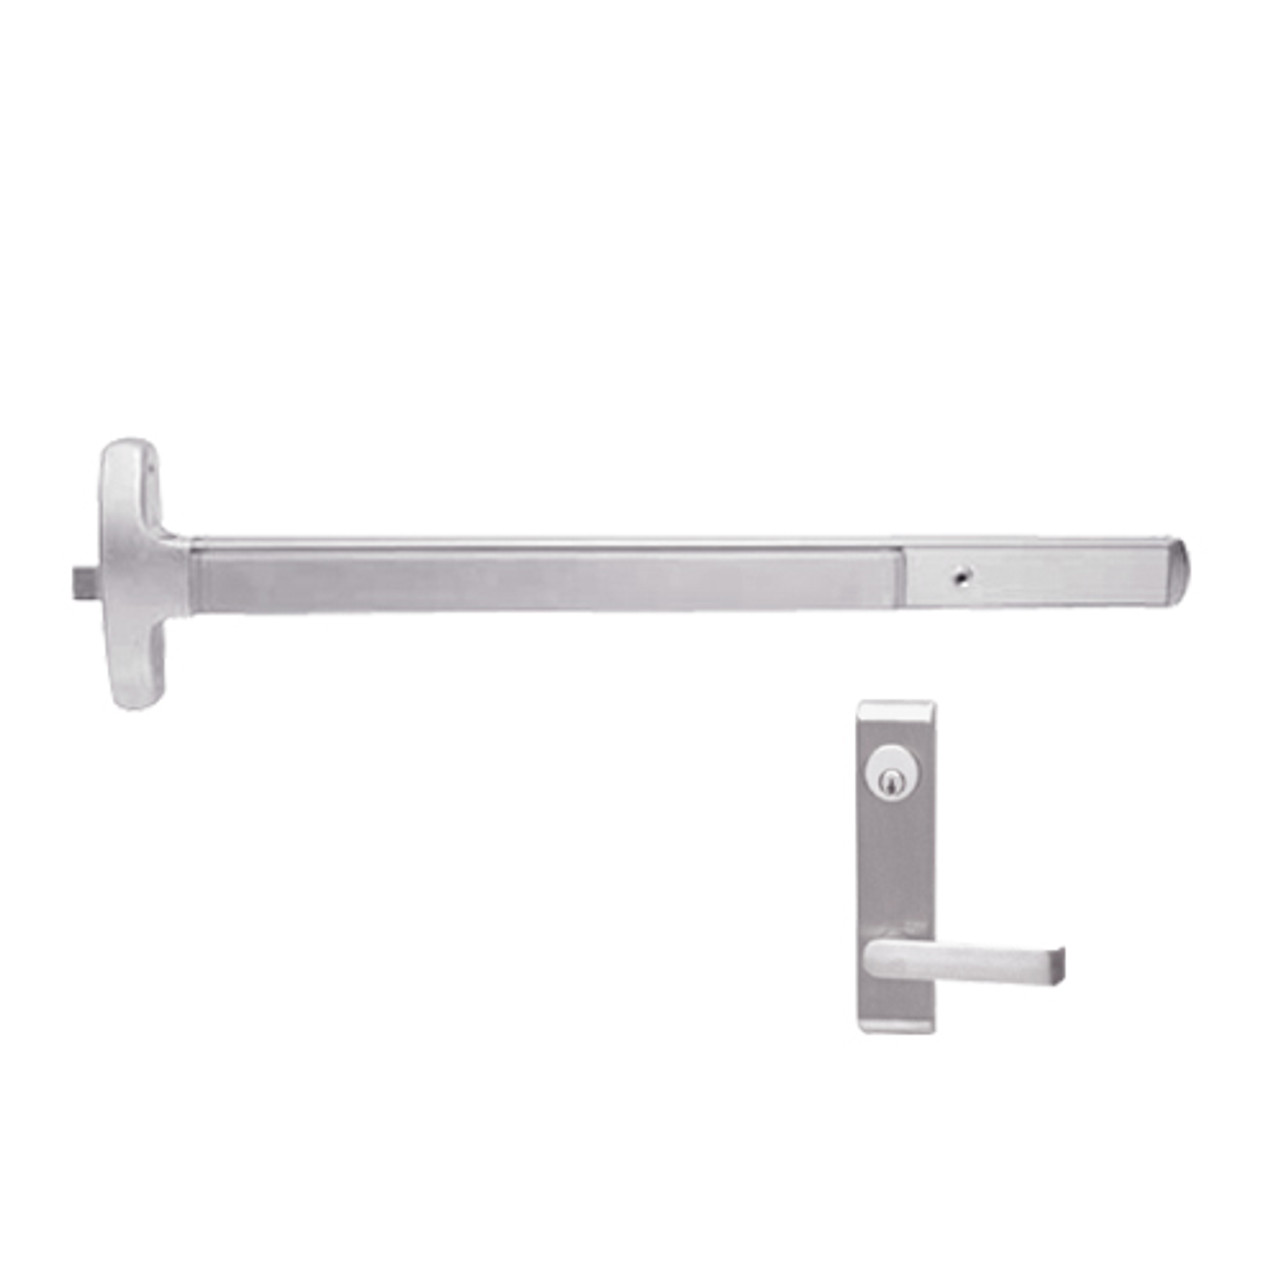 24-R-L-NL-DANE-US32-4-RHR Falcon Exit Device in Polished Stainless Steel